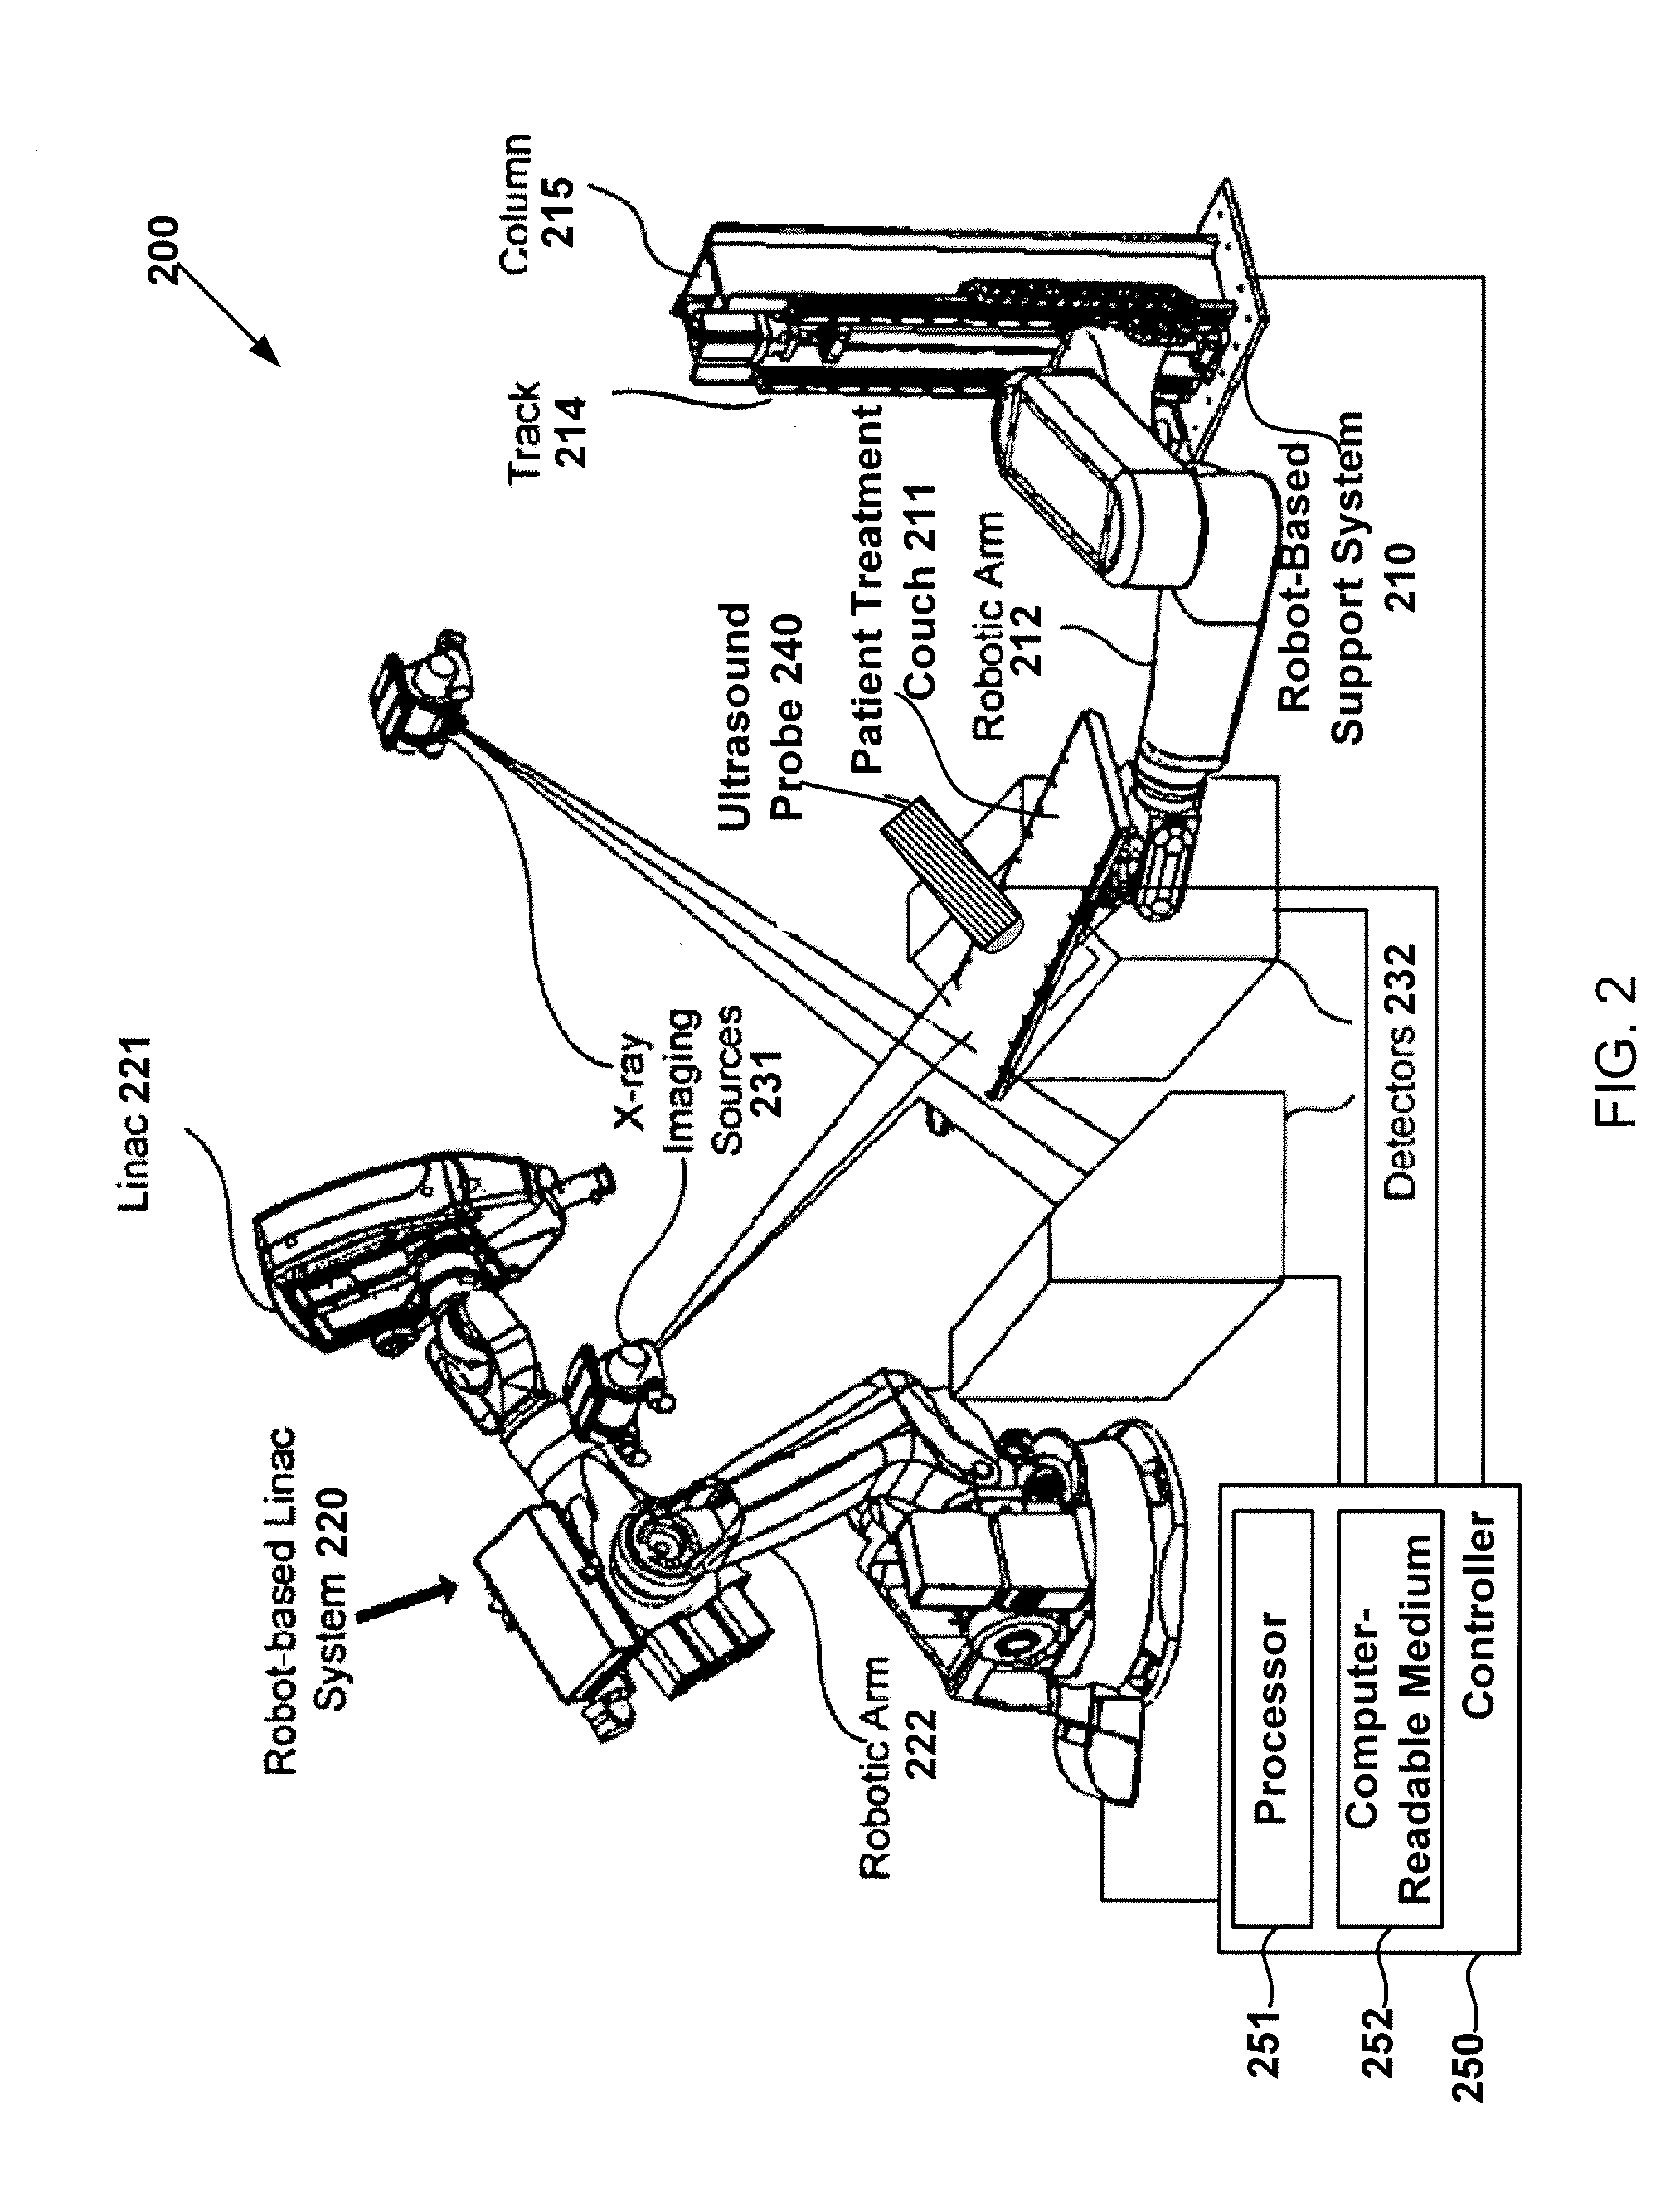 Systems and Methods for Real-Time Tumor Tracking During Radiation Treatment Using Ultrasound Imaging